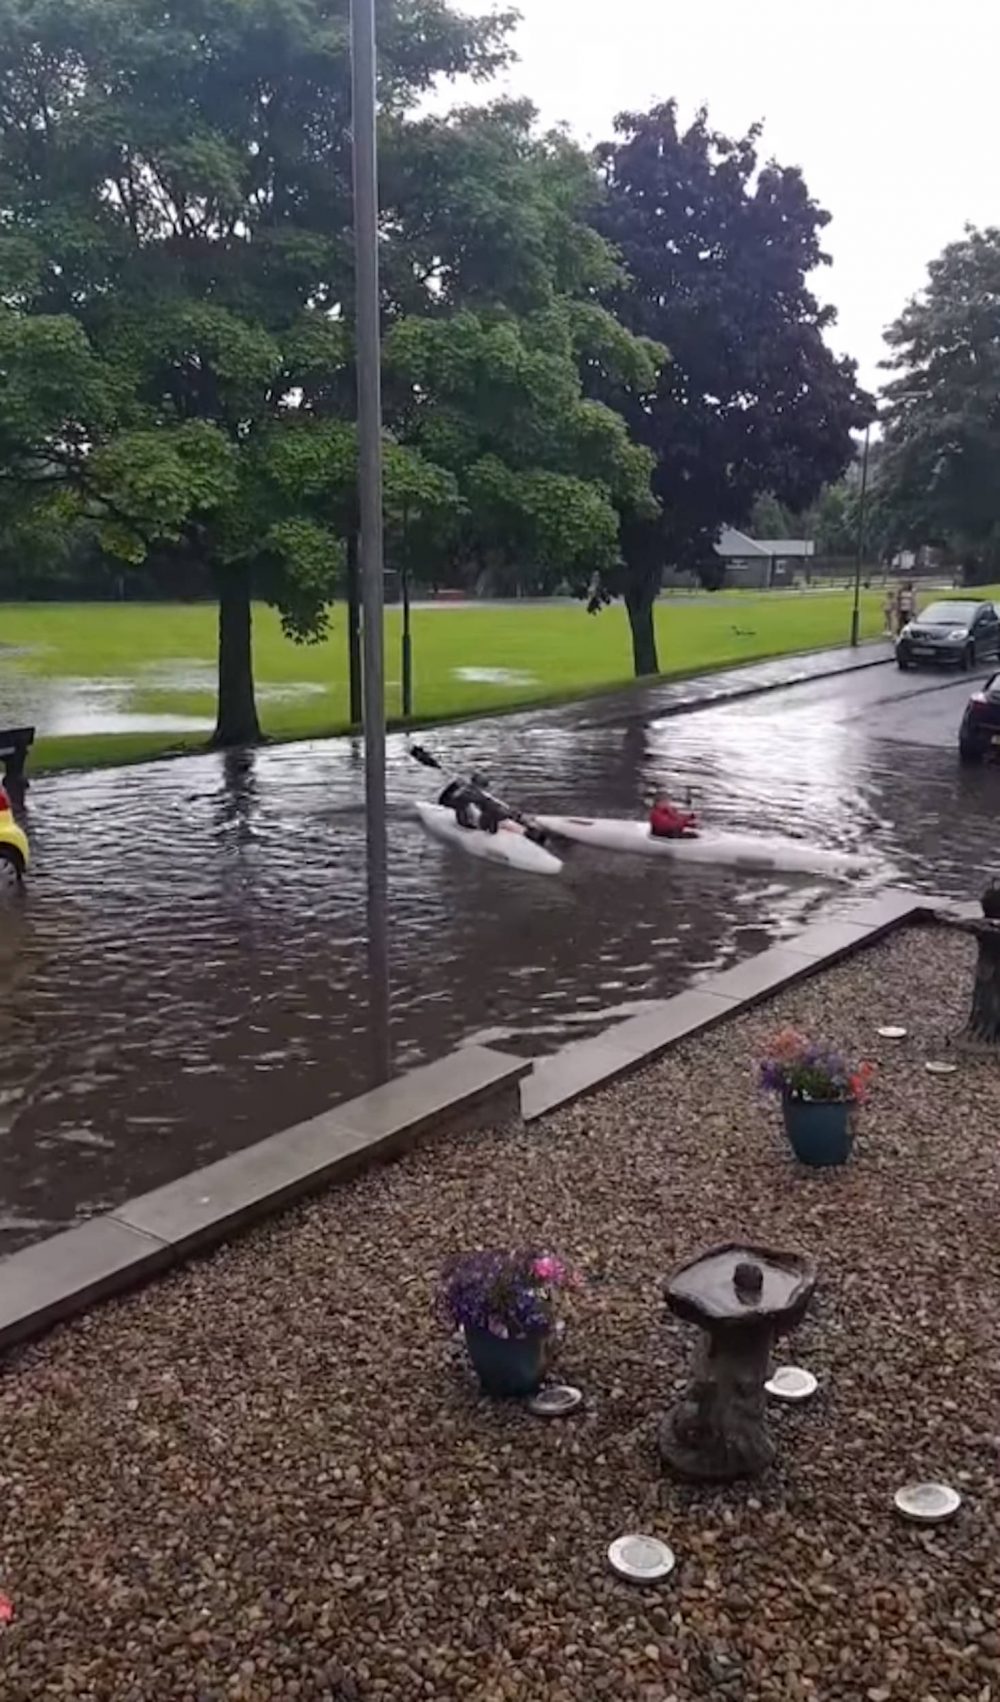 Jardine and Max kayaking in the flooding | Scottish Weather News